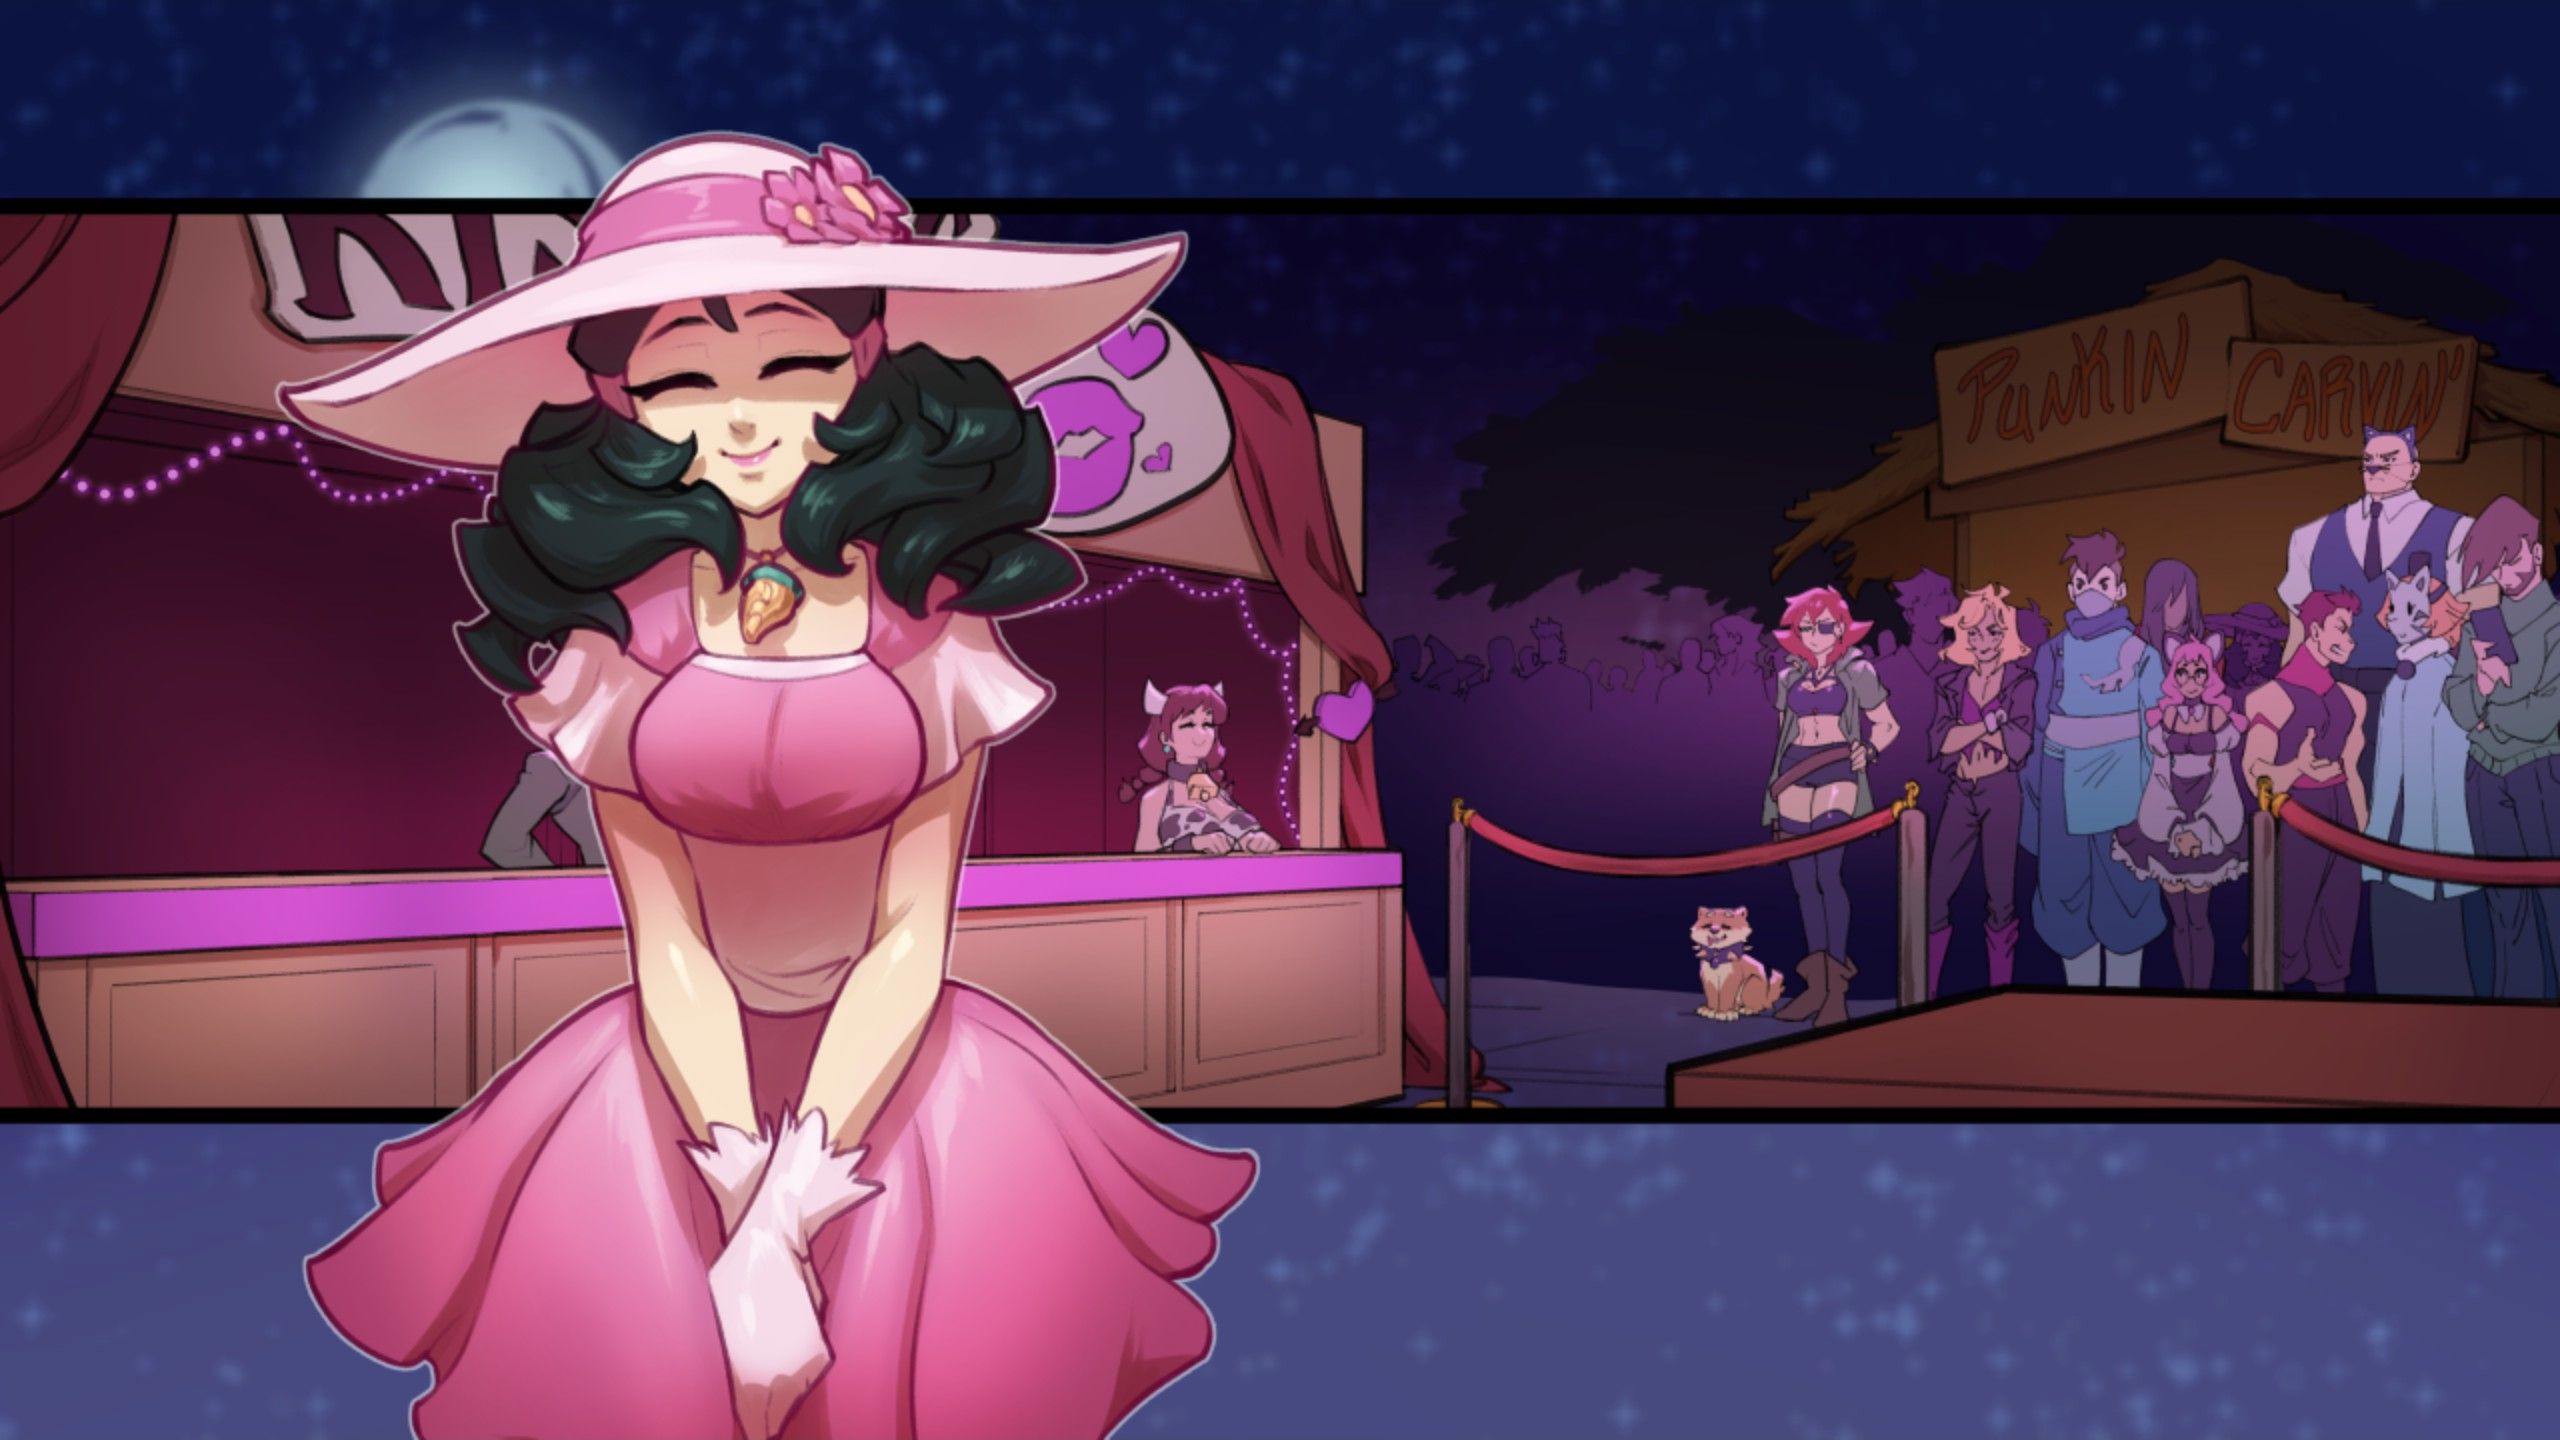  Love Sucks: Night Two is a horny game where the real fantasy isn't sex, it's enjoying a carnival without almost immediately getting tired and wanting to go home 